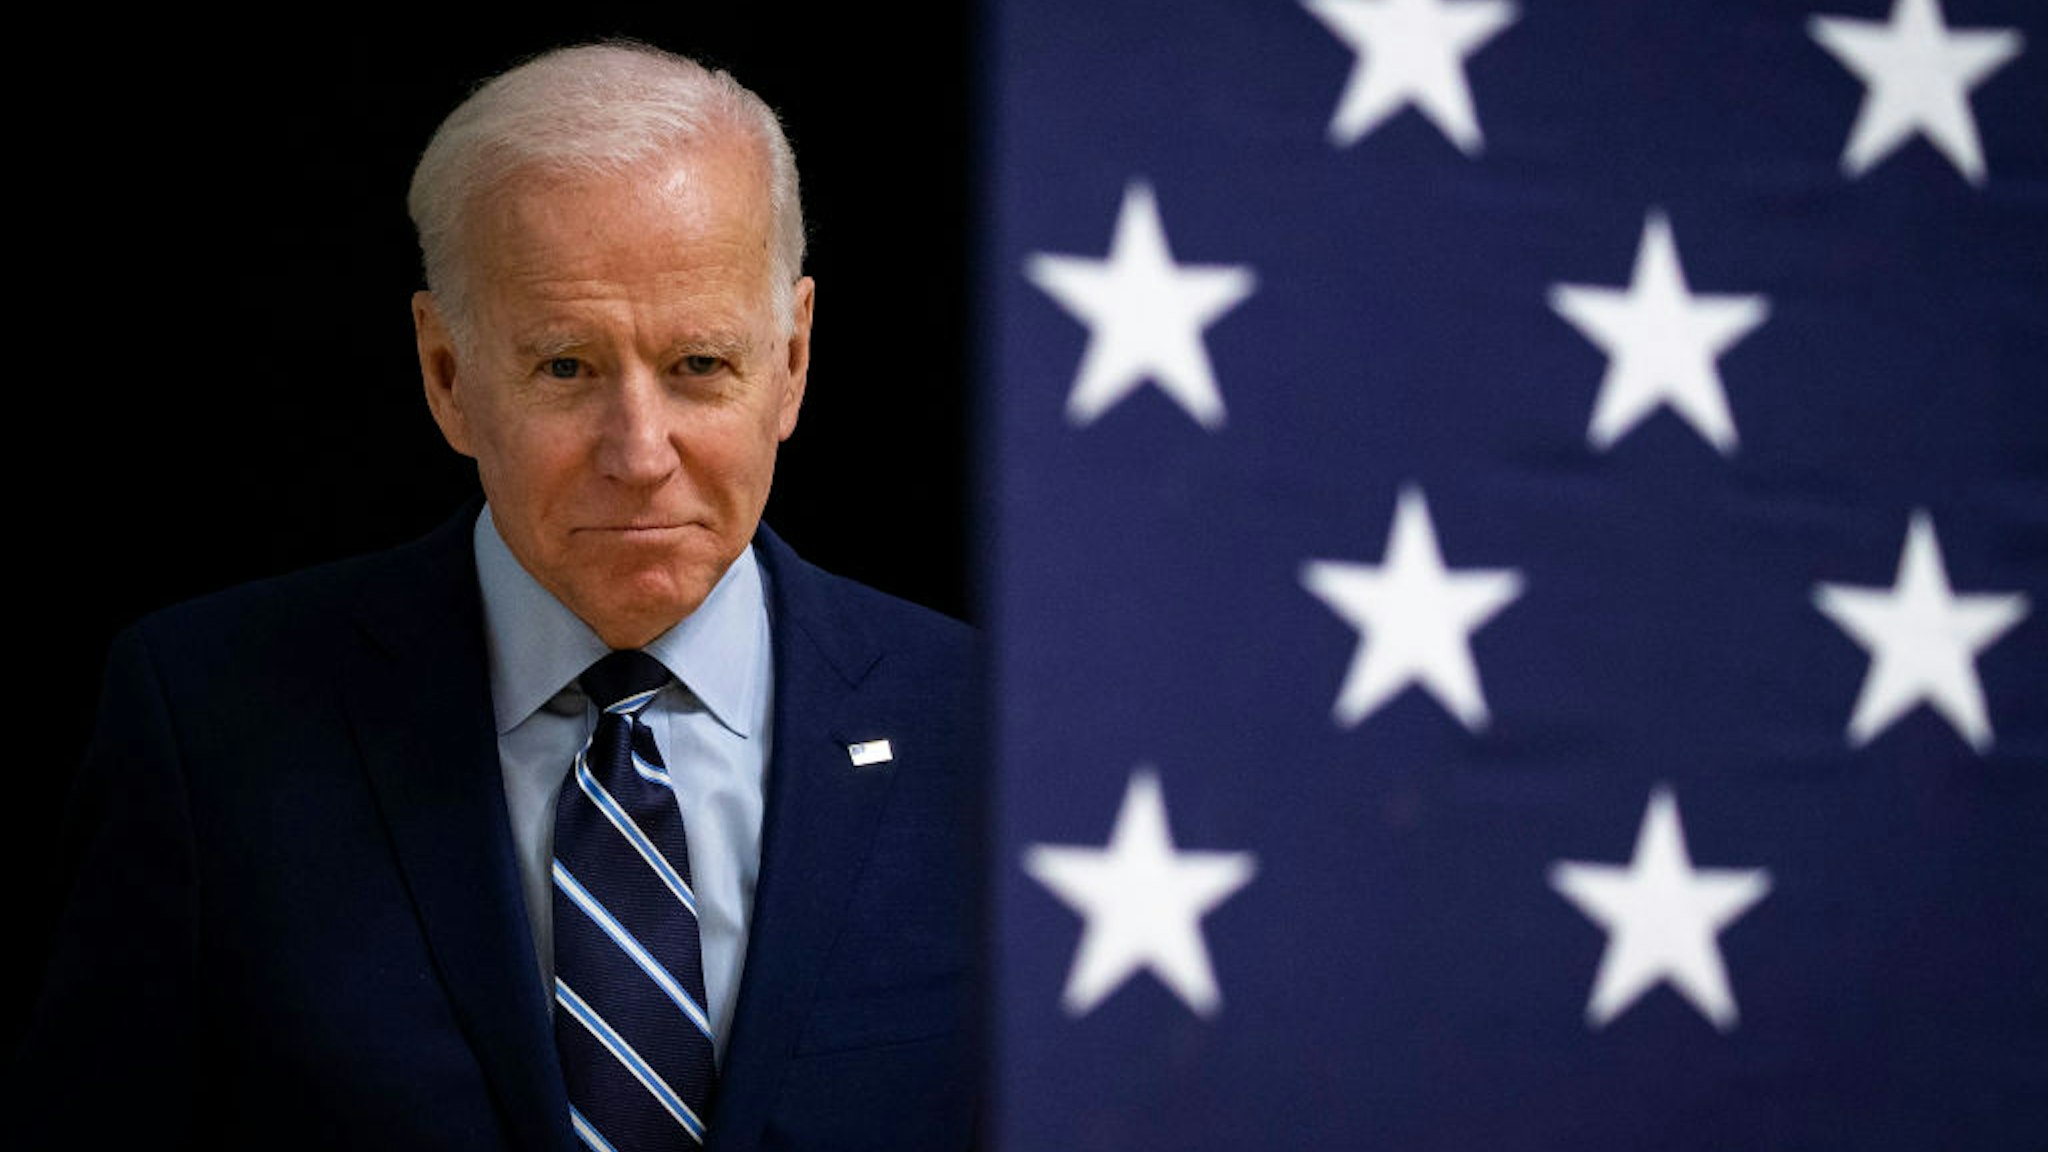 FORT DODGE, IA - JANUARY 21: Democratic presidential candidate, former Vice President Joe Biden arrives during an event at Iowa Central Community College on January 21, 2020 in Fort Dodge, Iowa. With less than two weeks to go until the Iowa caucus, the candidates are making their case to voters in the state of the first 2020 primary. (Photo by Al Drago/Getty Images)